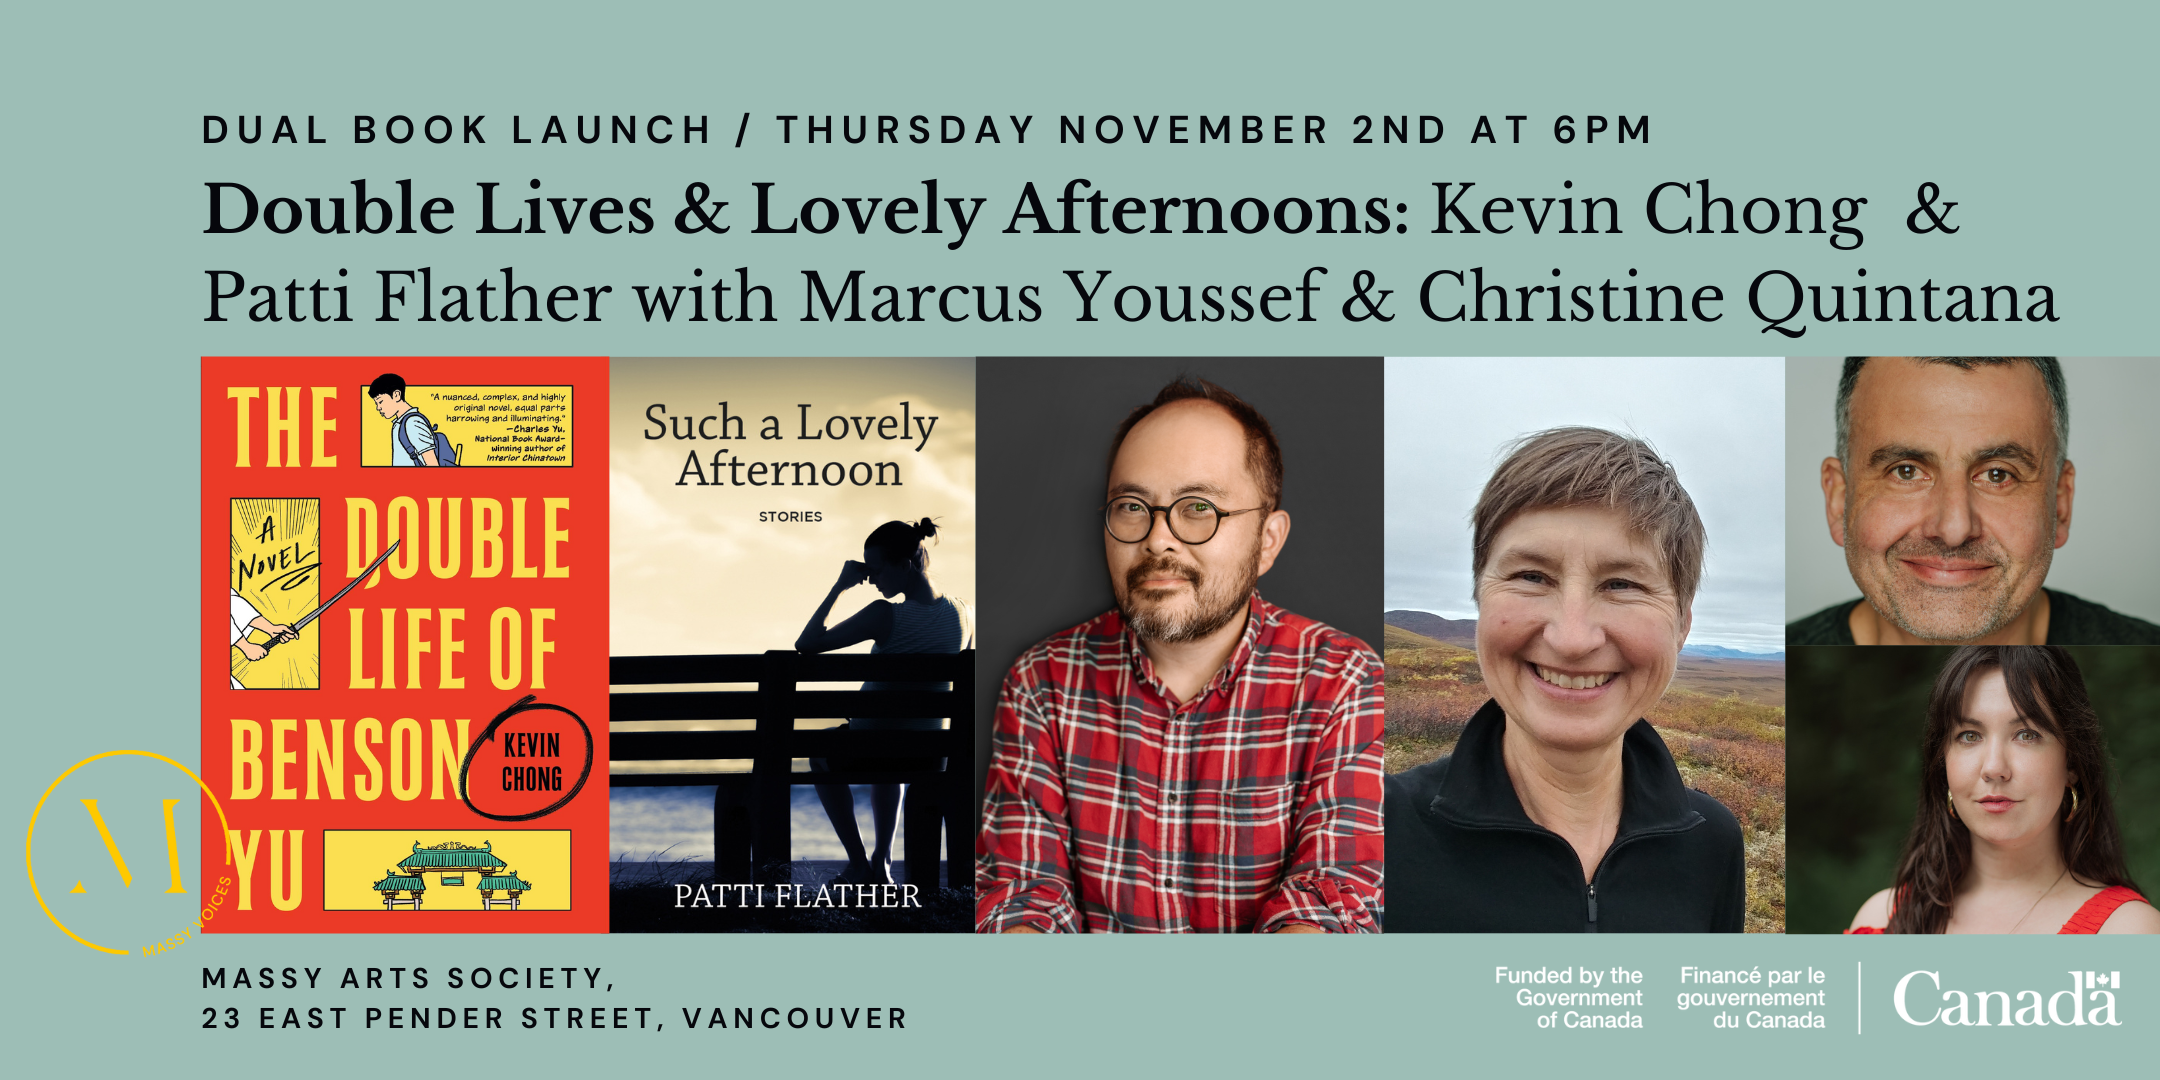 Book covers for The Double Lives of Benson Yu, & Such A Lovely Afternoon. Photographs of authors Kevin Chong & Patti Flather, & playwrights Marcus Youssef & Christine Quintana